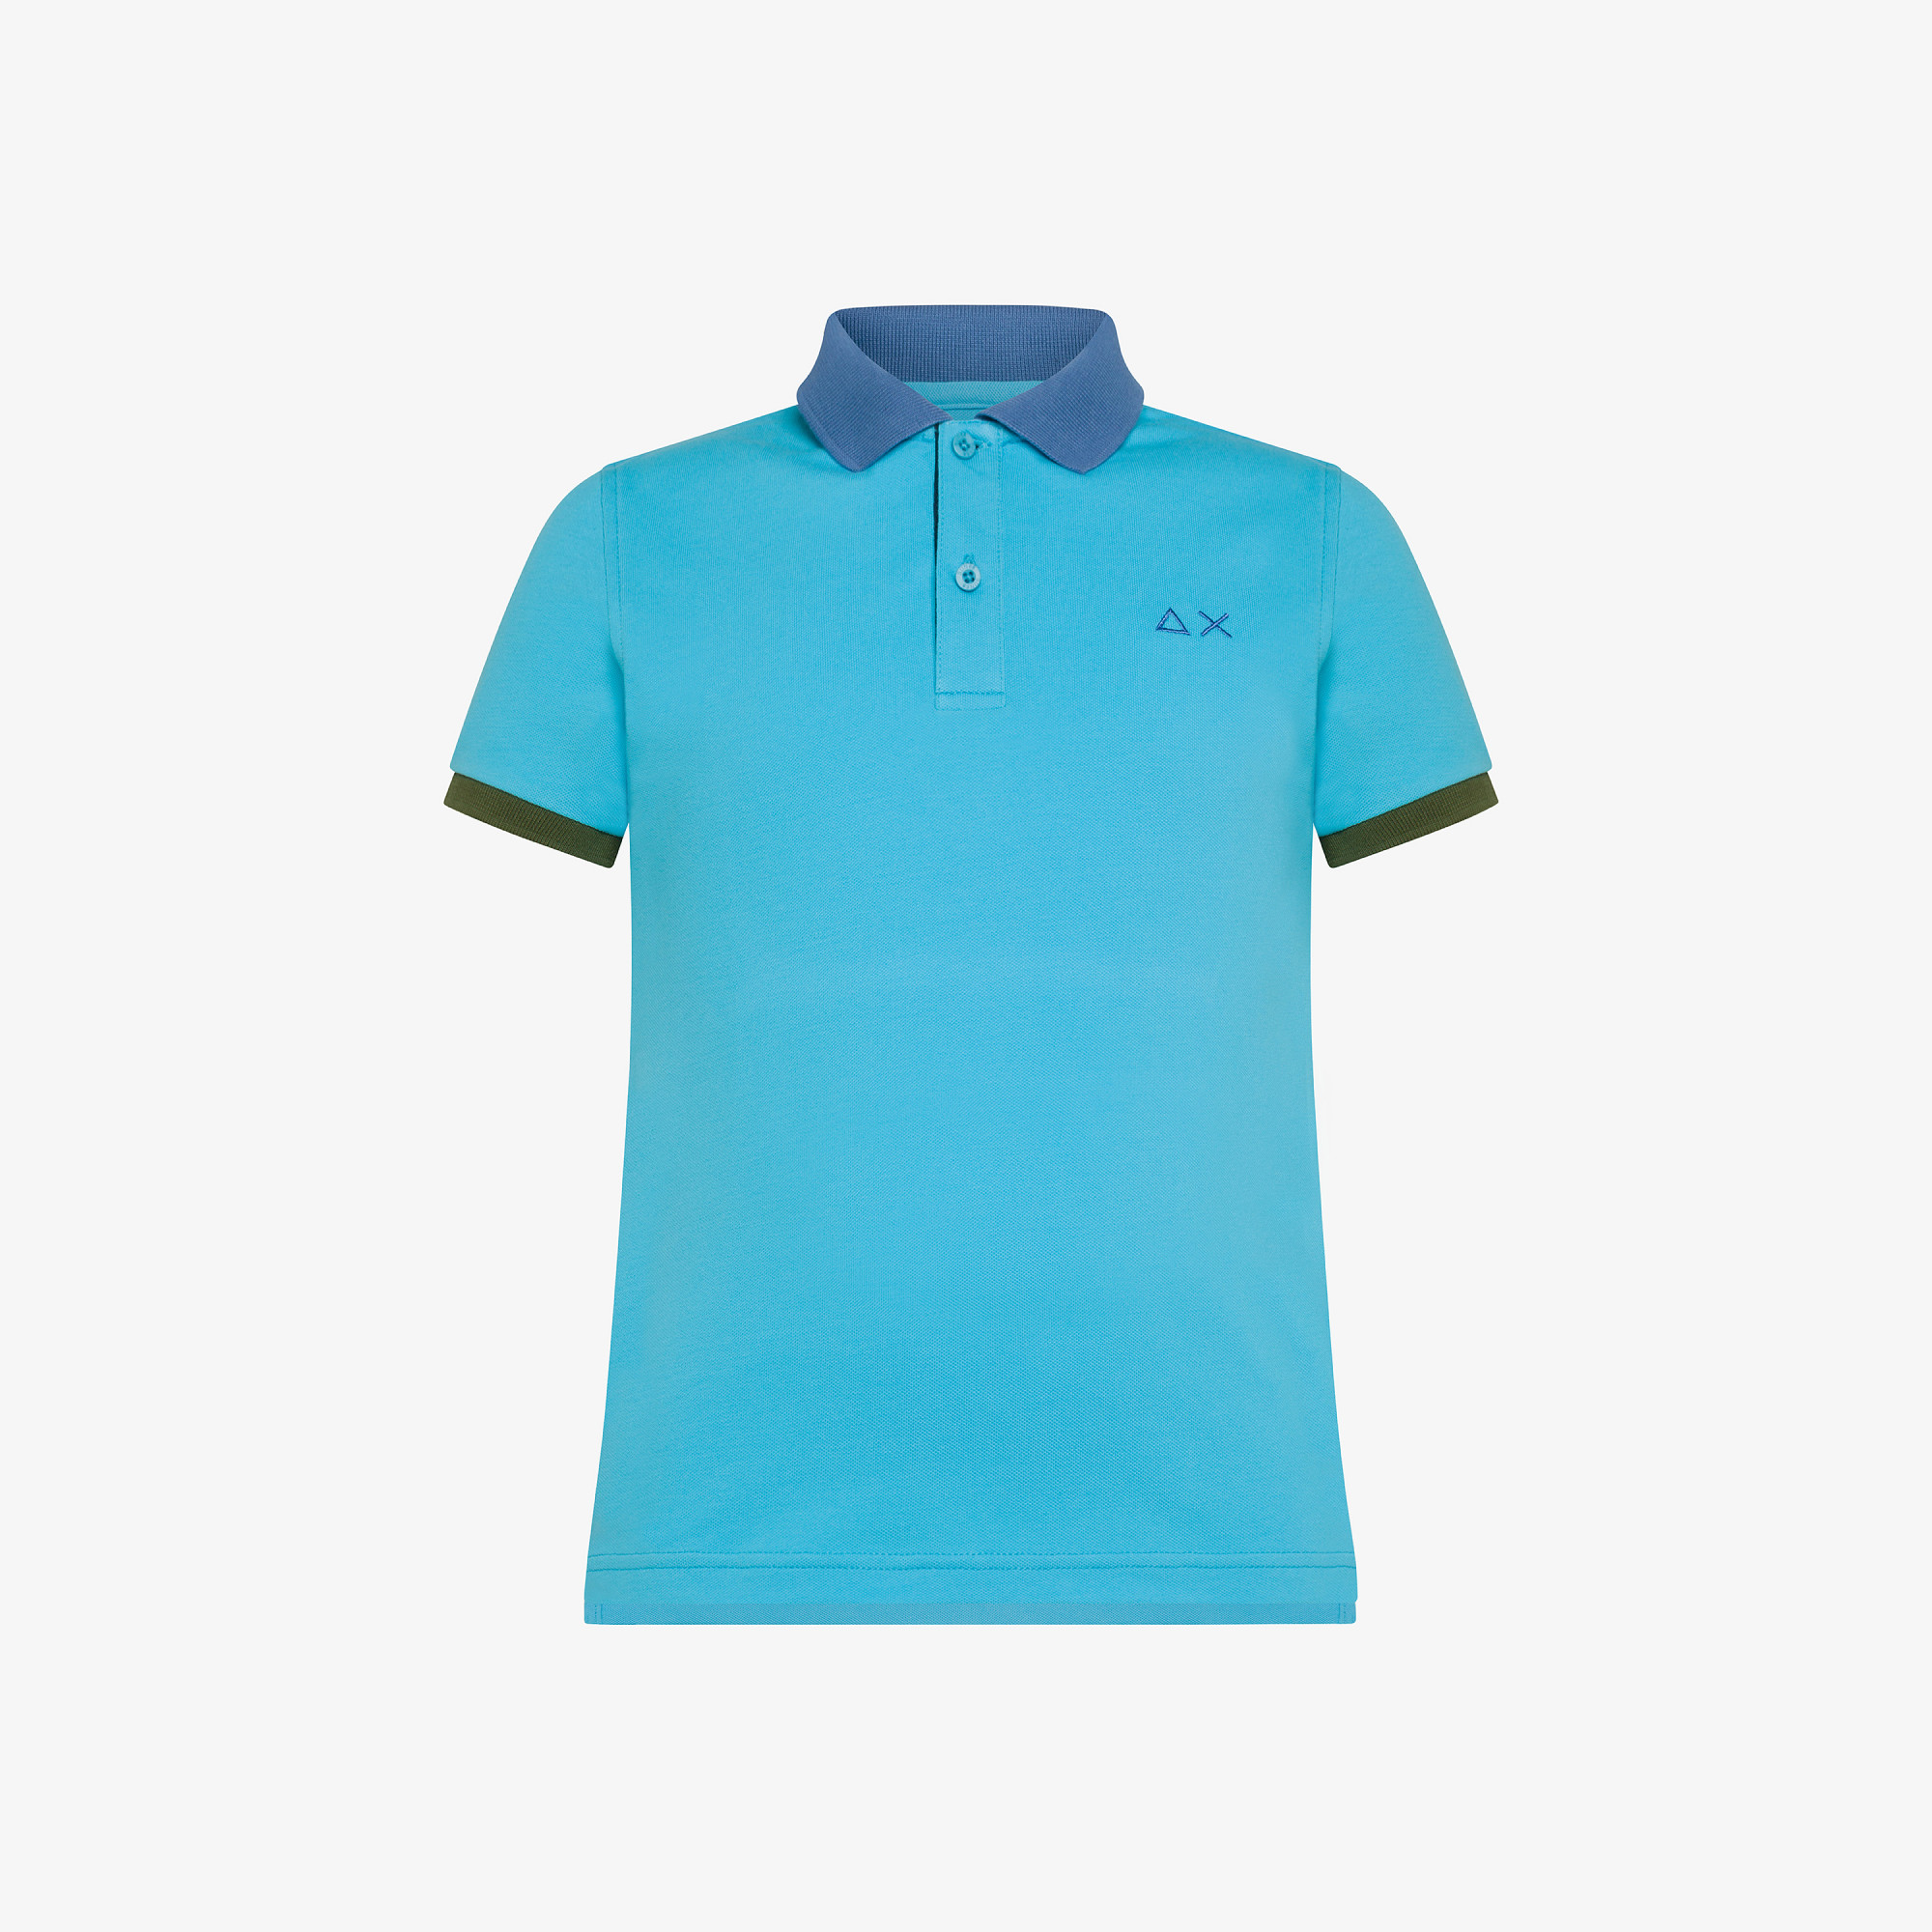 BOY'S POLO 3 COLOR WAY S/S TURQUOISE